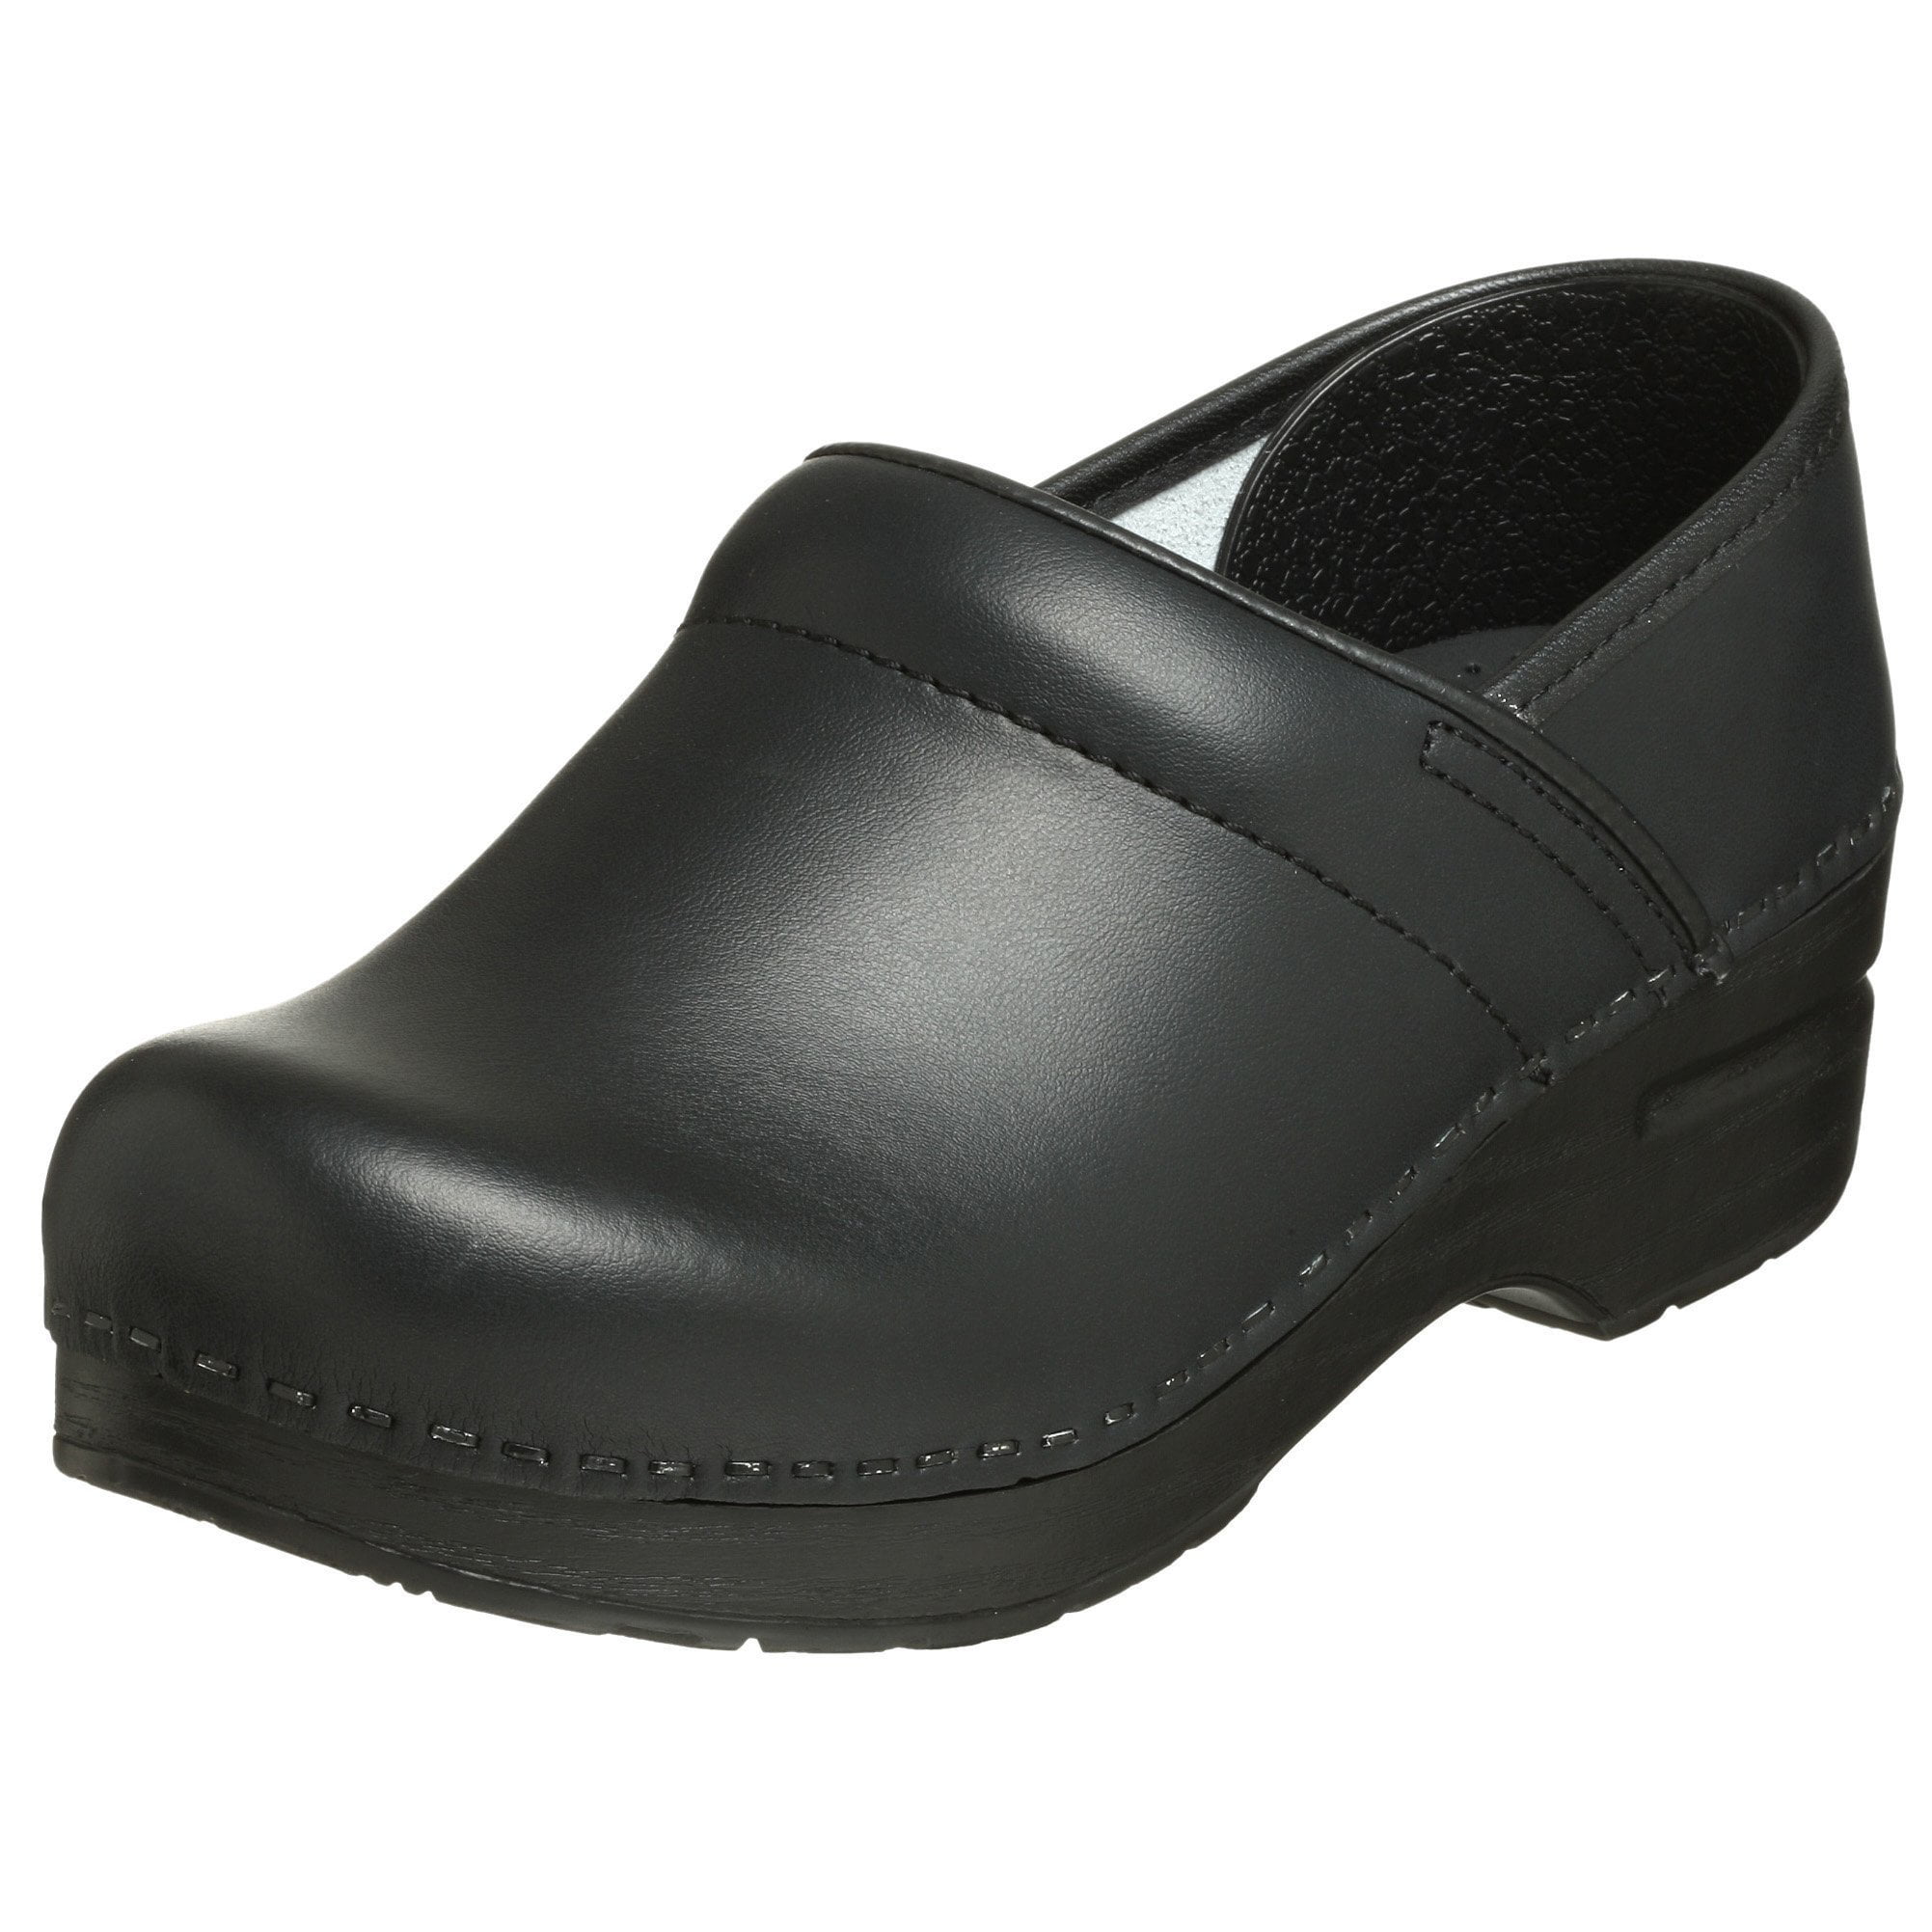 stores that sell dansko clogs